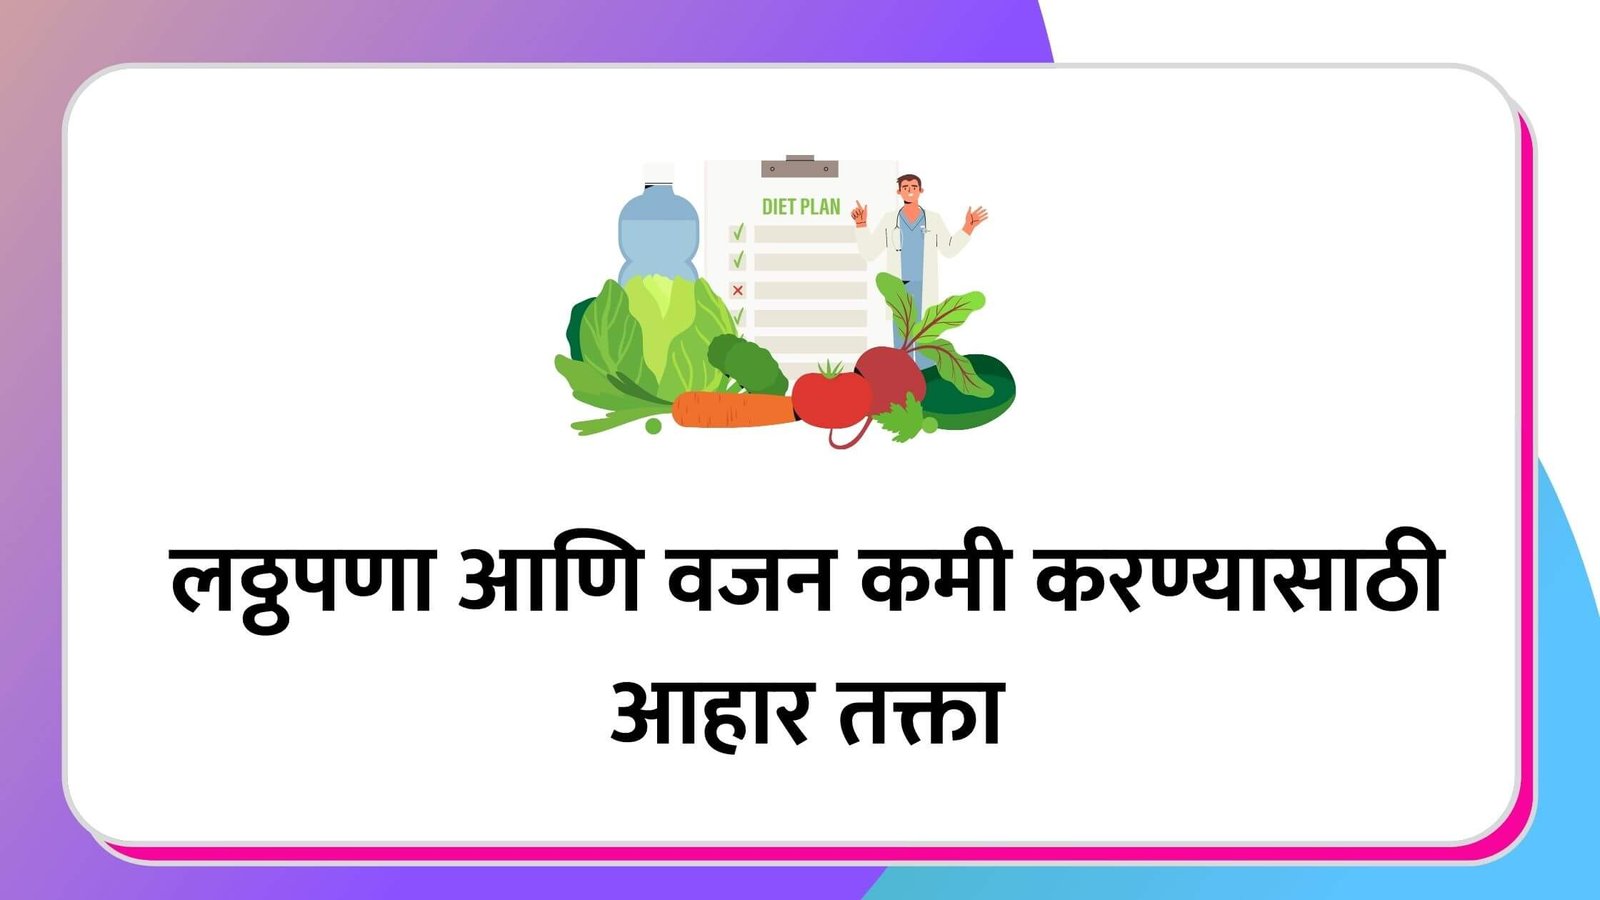 Diet plan For Weight Loss in Marathi